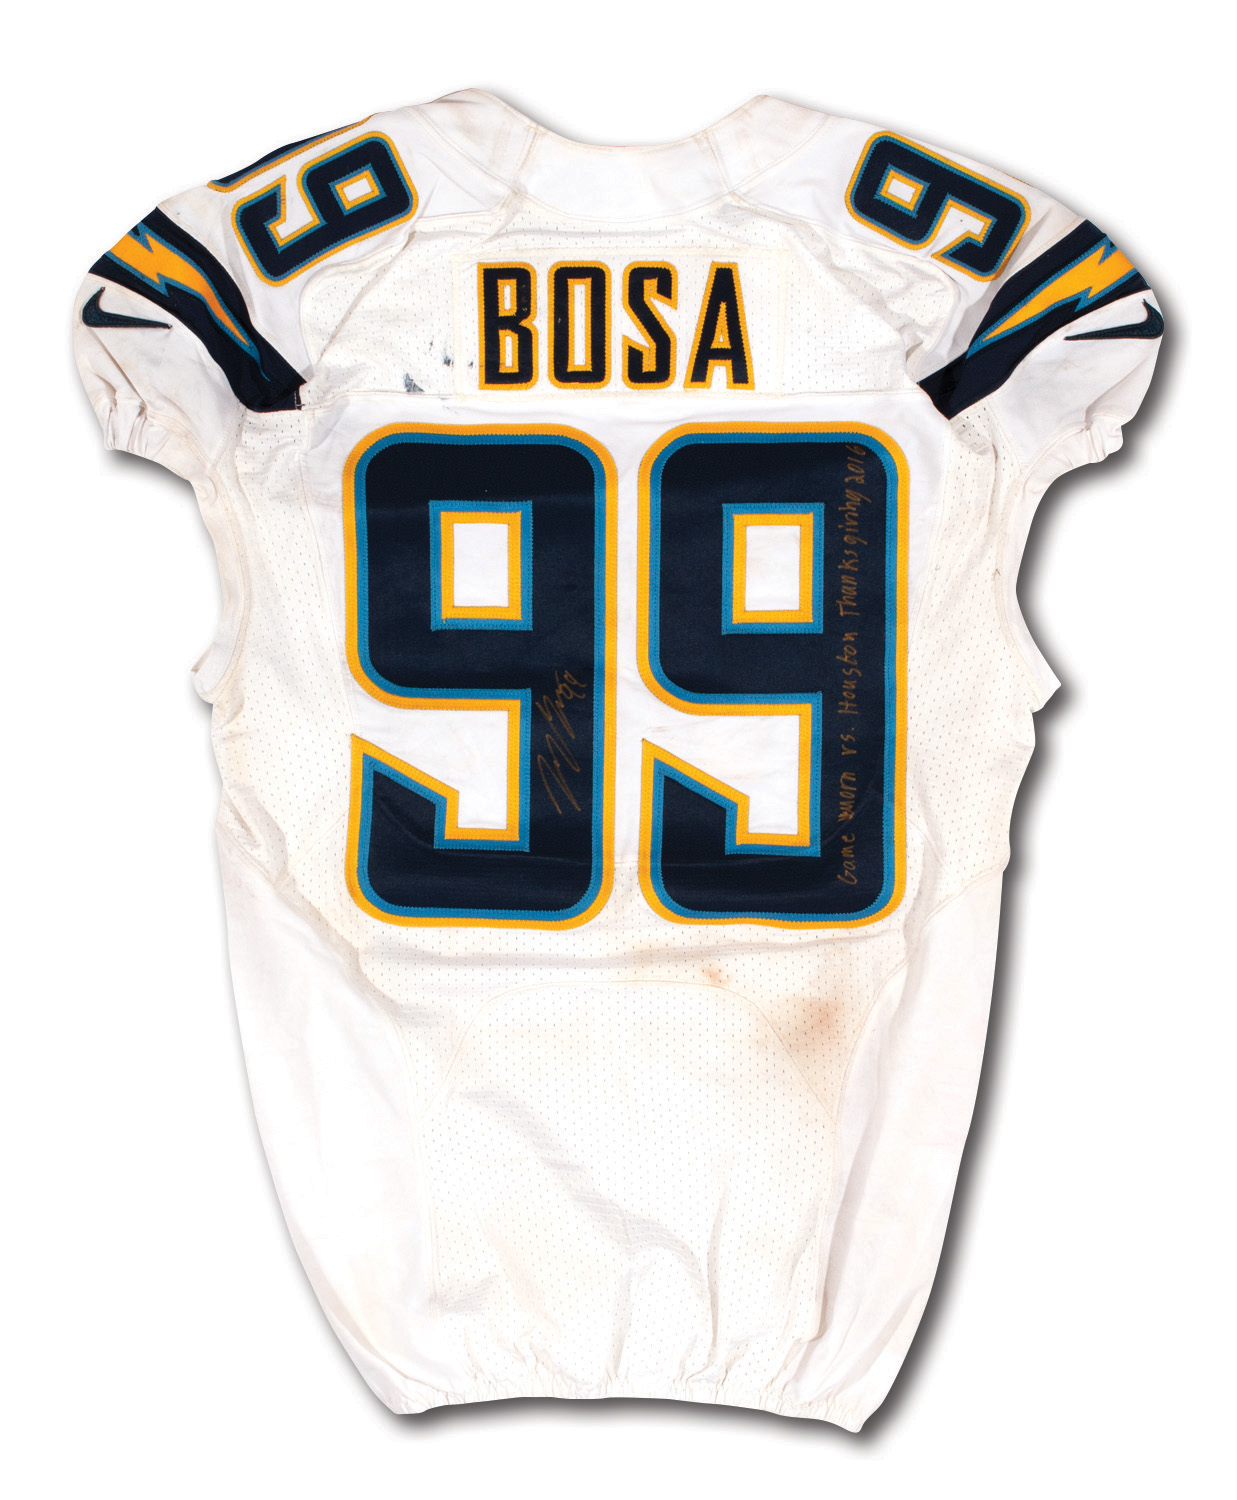 Joey Bosa Signed San Diego Chargers Jersey (Beckett) Ohio State